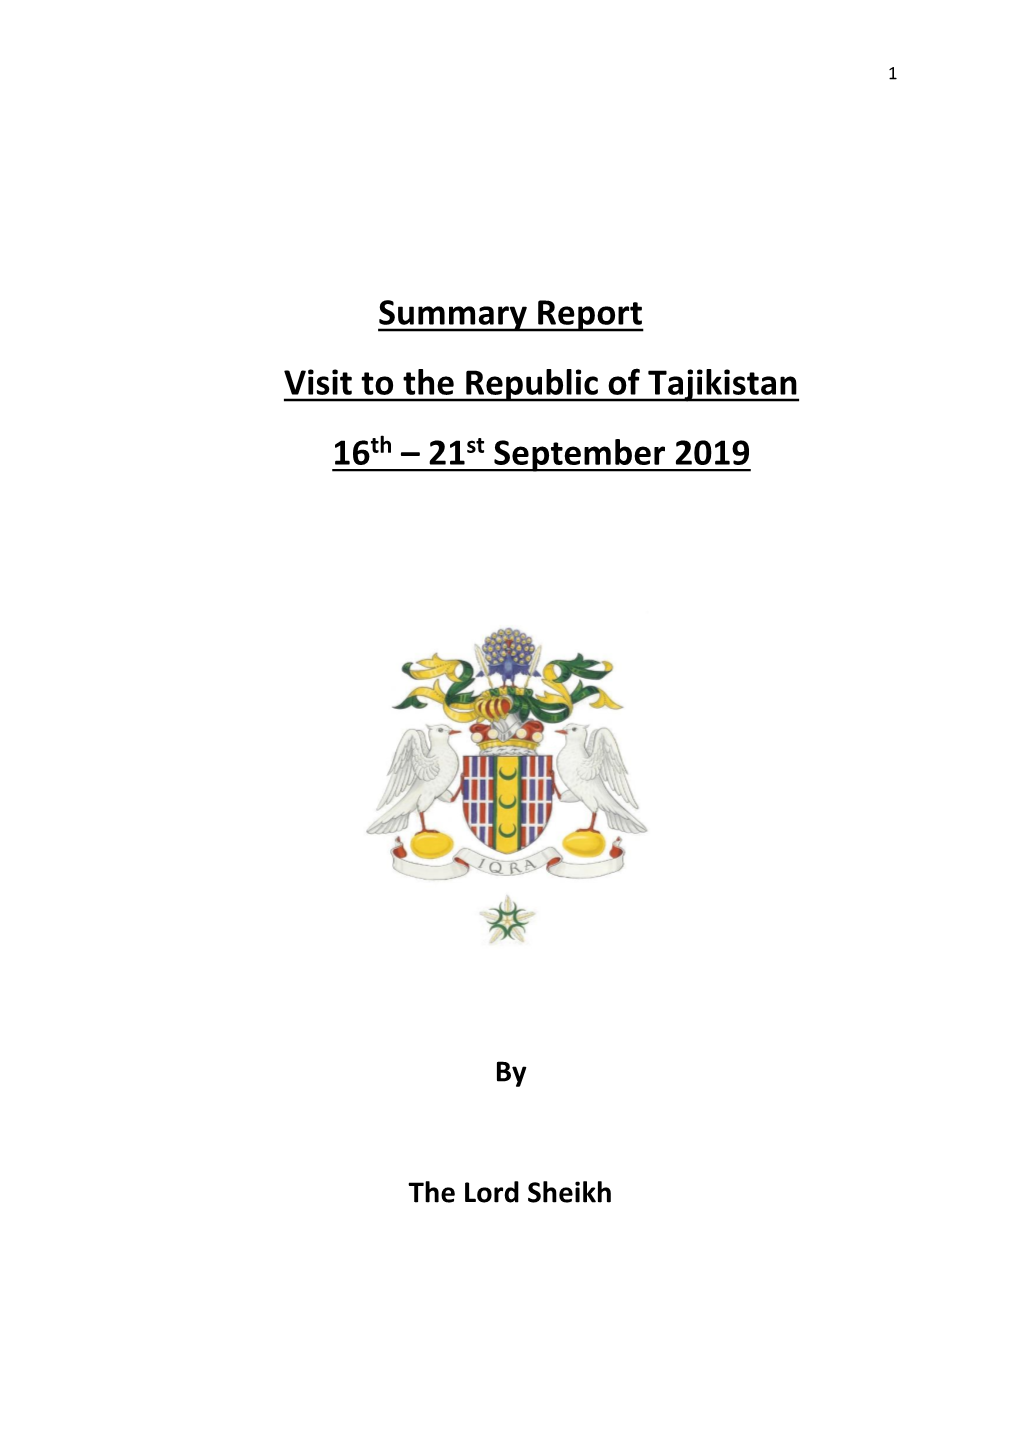 Summary Report Visit to the Republic of Tajikistan 16Th – 21St September 2019